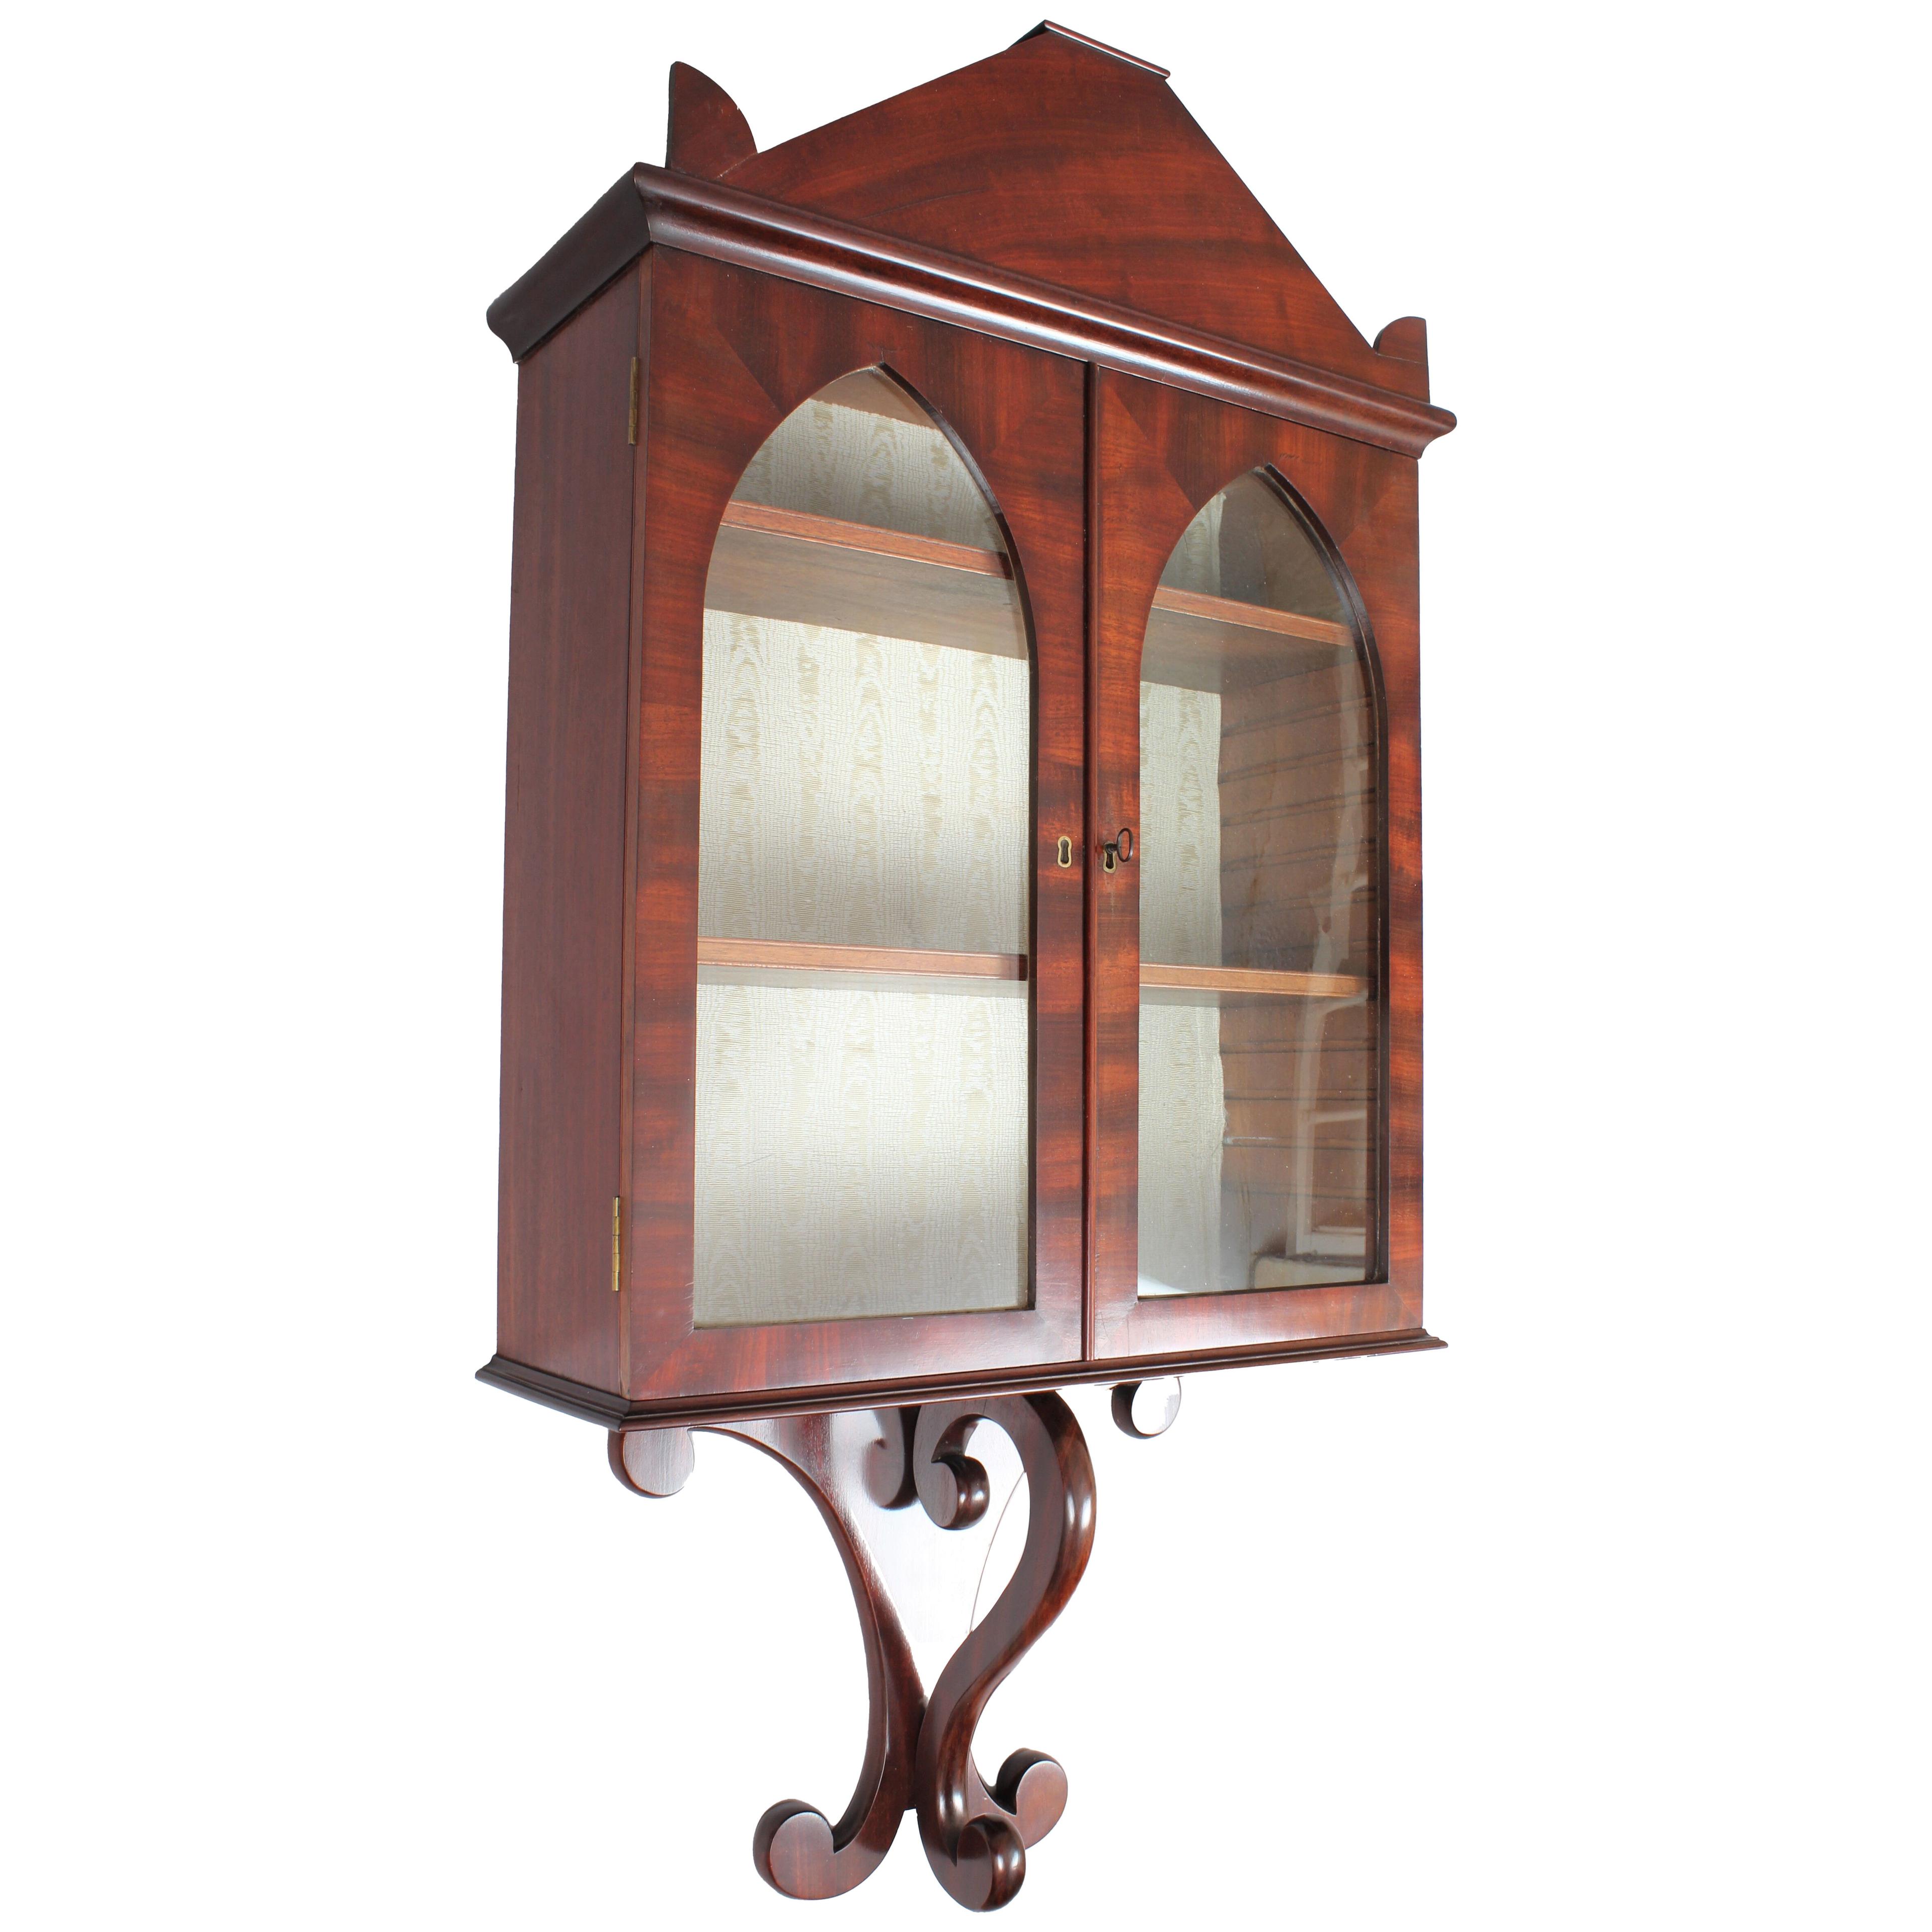 An unusual and good quality George IV period mahogany wall display cabinet